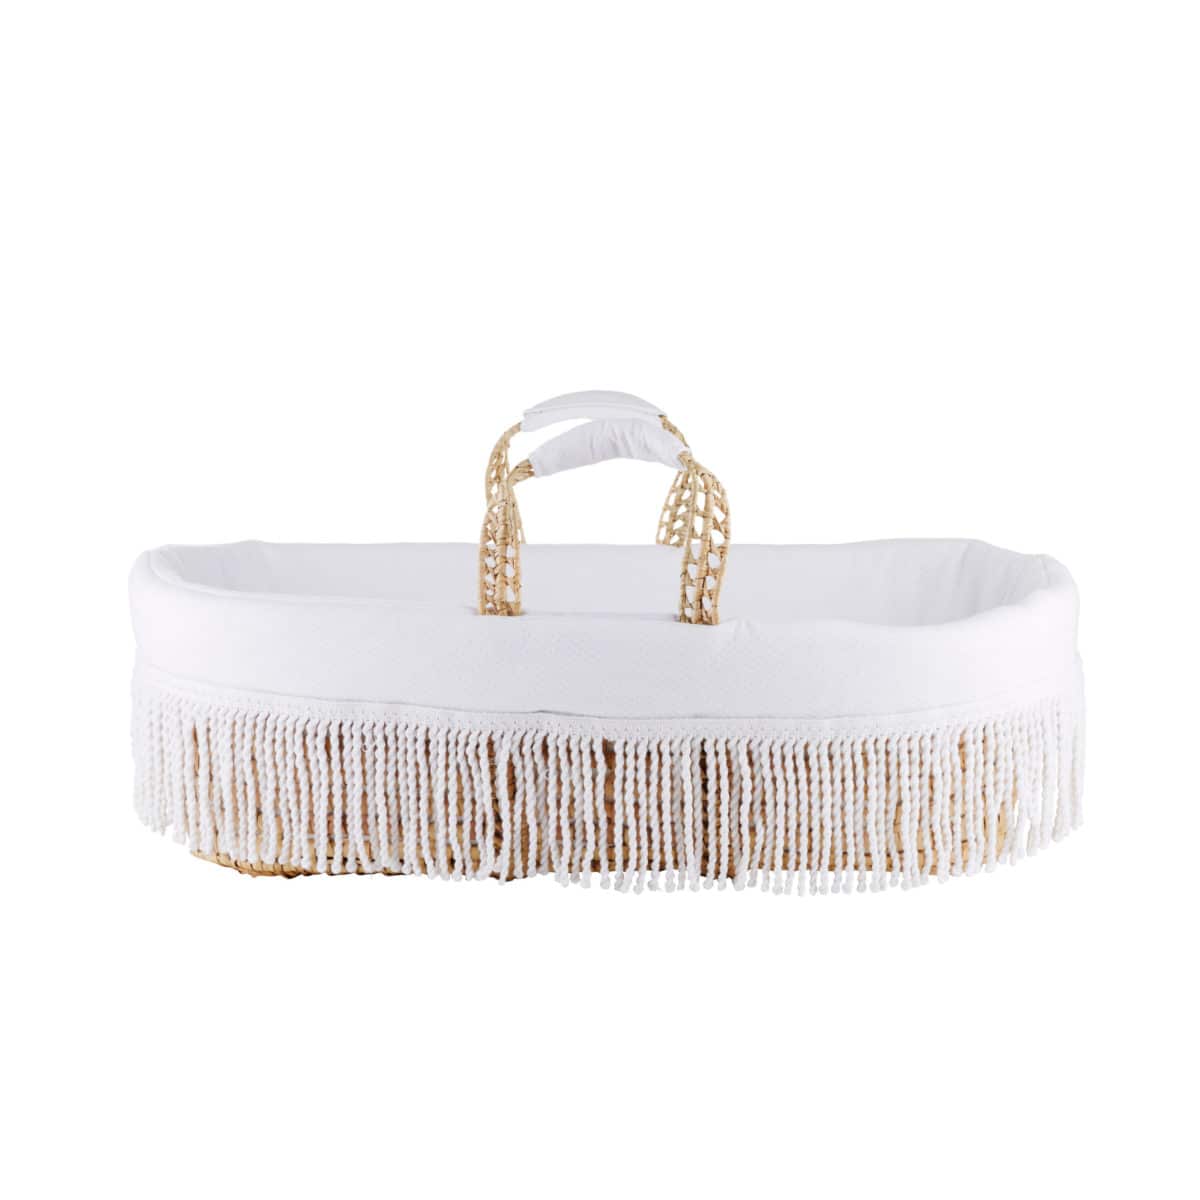 Theophile & Patachou Wicker Moses and Cover with White Fringes - Safari